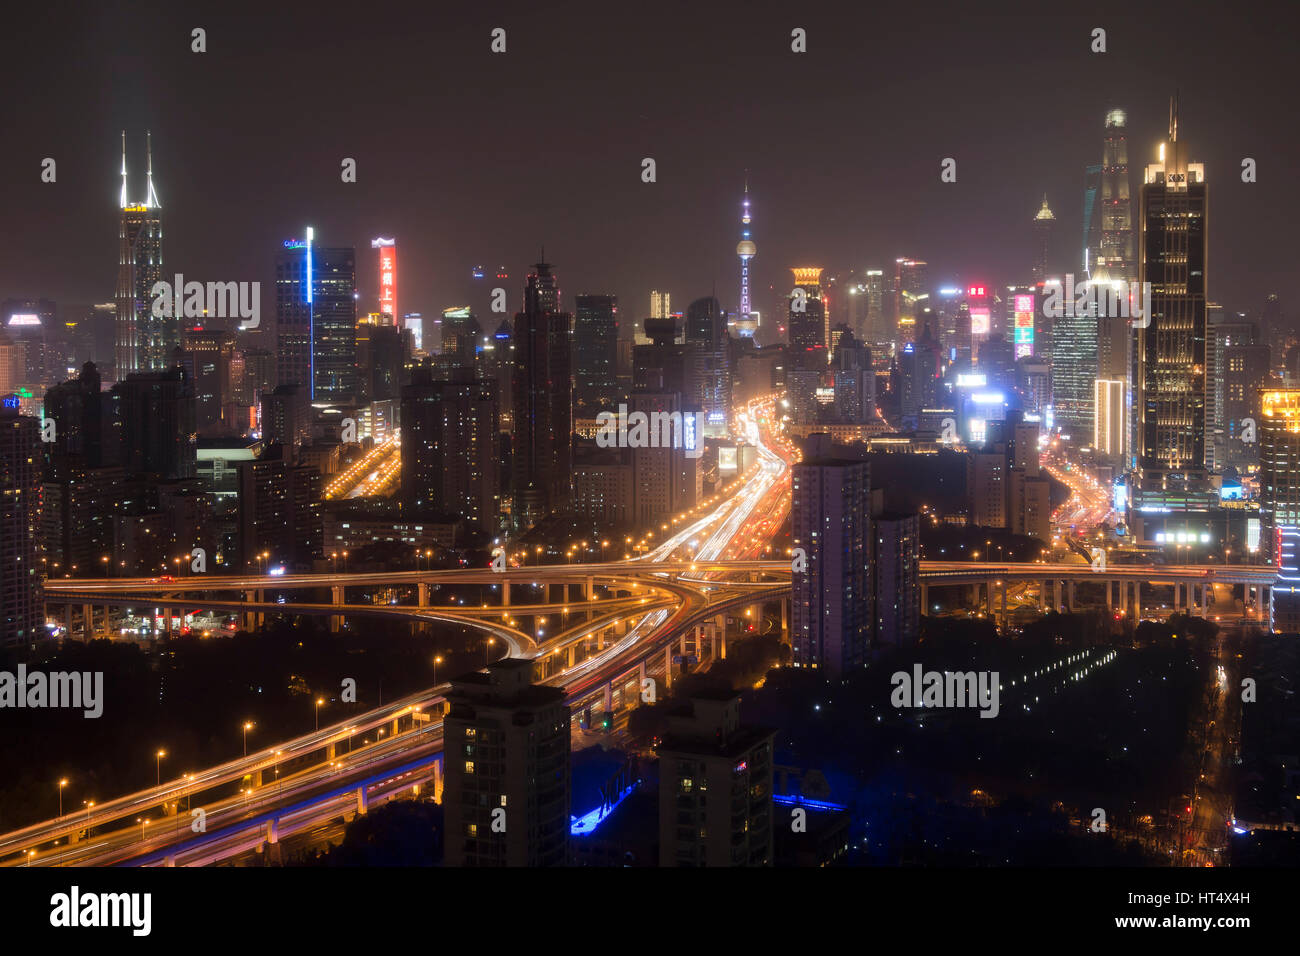 Shanghai, China - March 2, 2017: Shanghai skyline at night with the Shanghai Tower and Shanghai World Financial Center on background Stock Photo